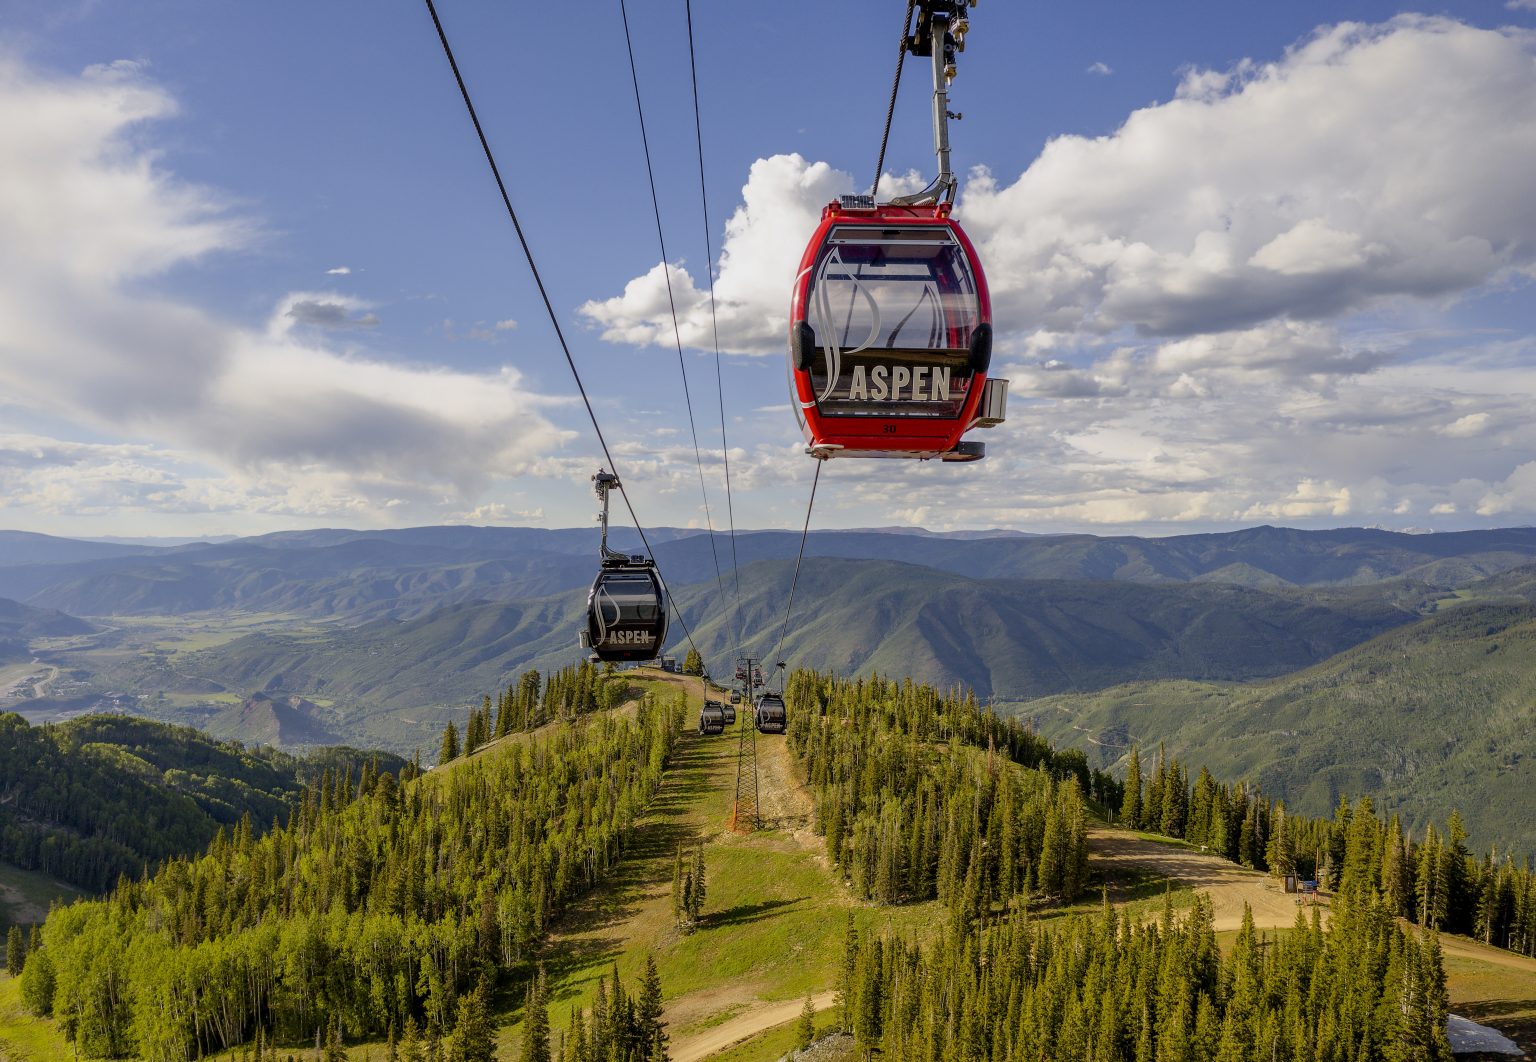 New and Improved Summer Offerings at Aspen Snowmass L.A. Parent